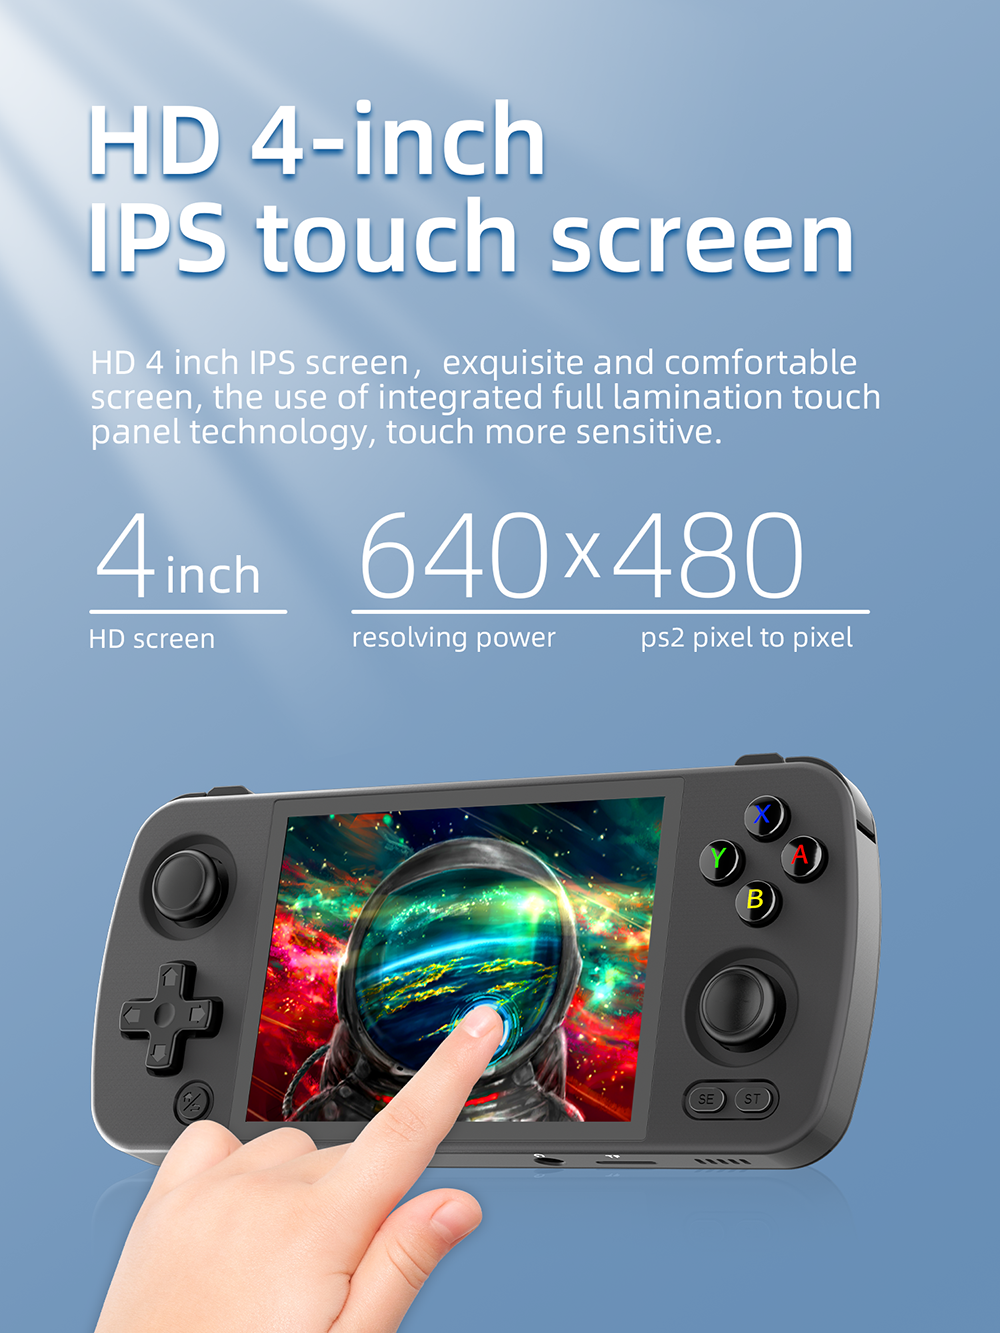 ANBERNIC RG405M 128GB eMMC Android 12 Handheld Game Console 4 inch IPS Touch Screen T618 CNC Aluminum Alloy Portable Retro Player Support OTA Update